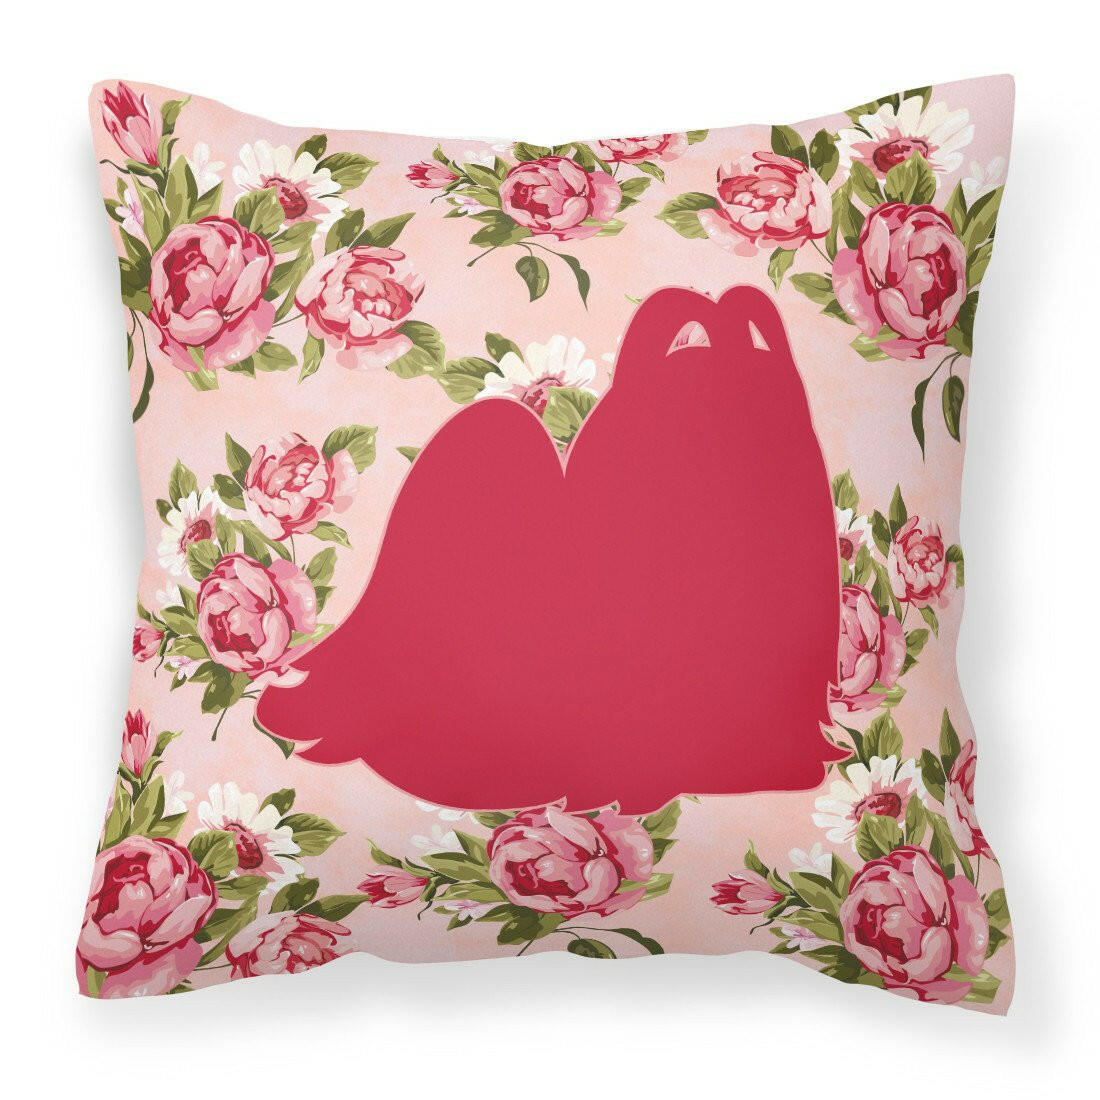 Maltese Shabby Chic Pink Roses  Fabric Decorative Pillow BB1079-RS-PK-PW1414 - the-store.com